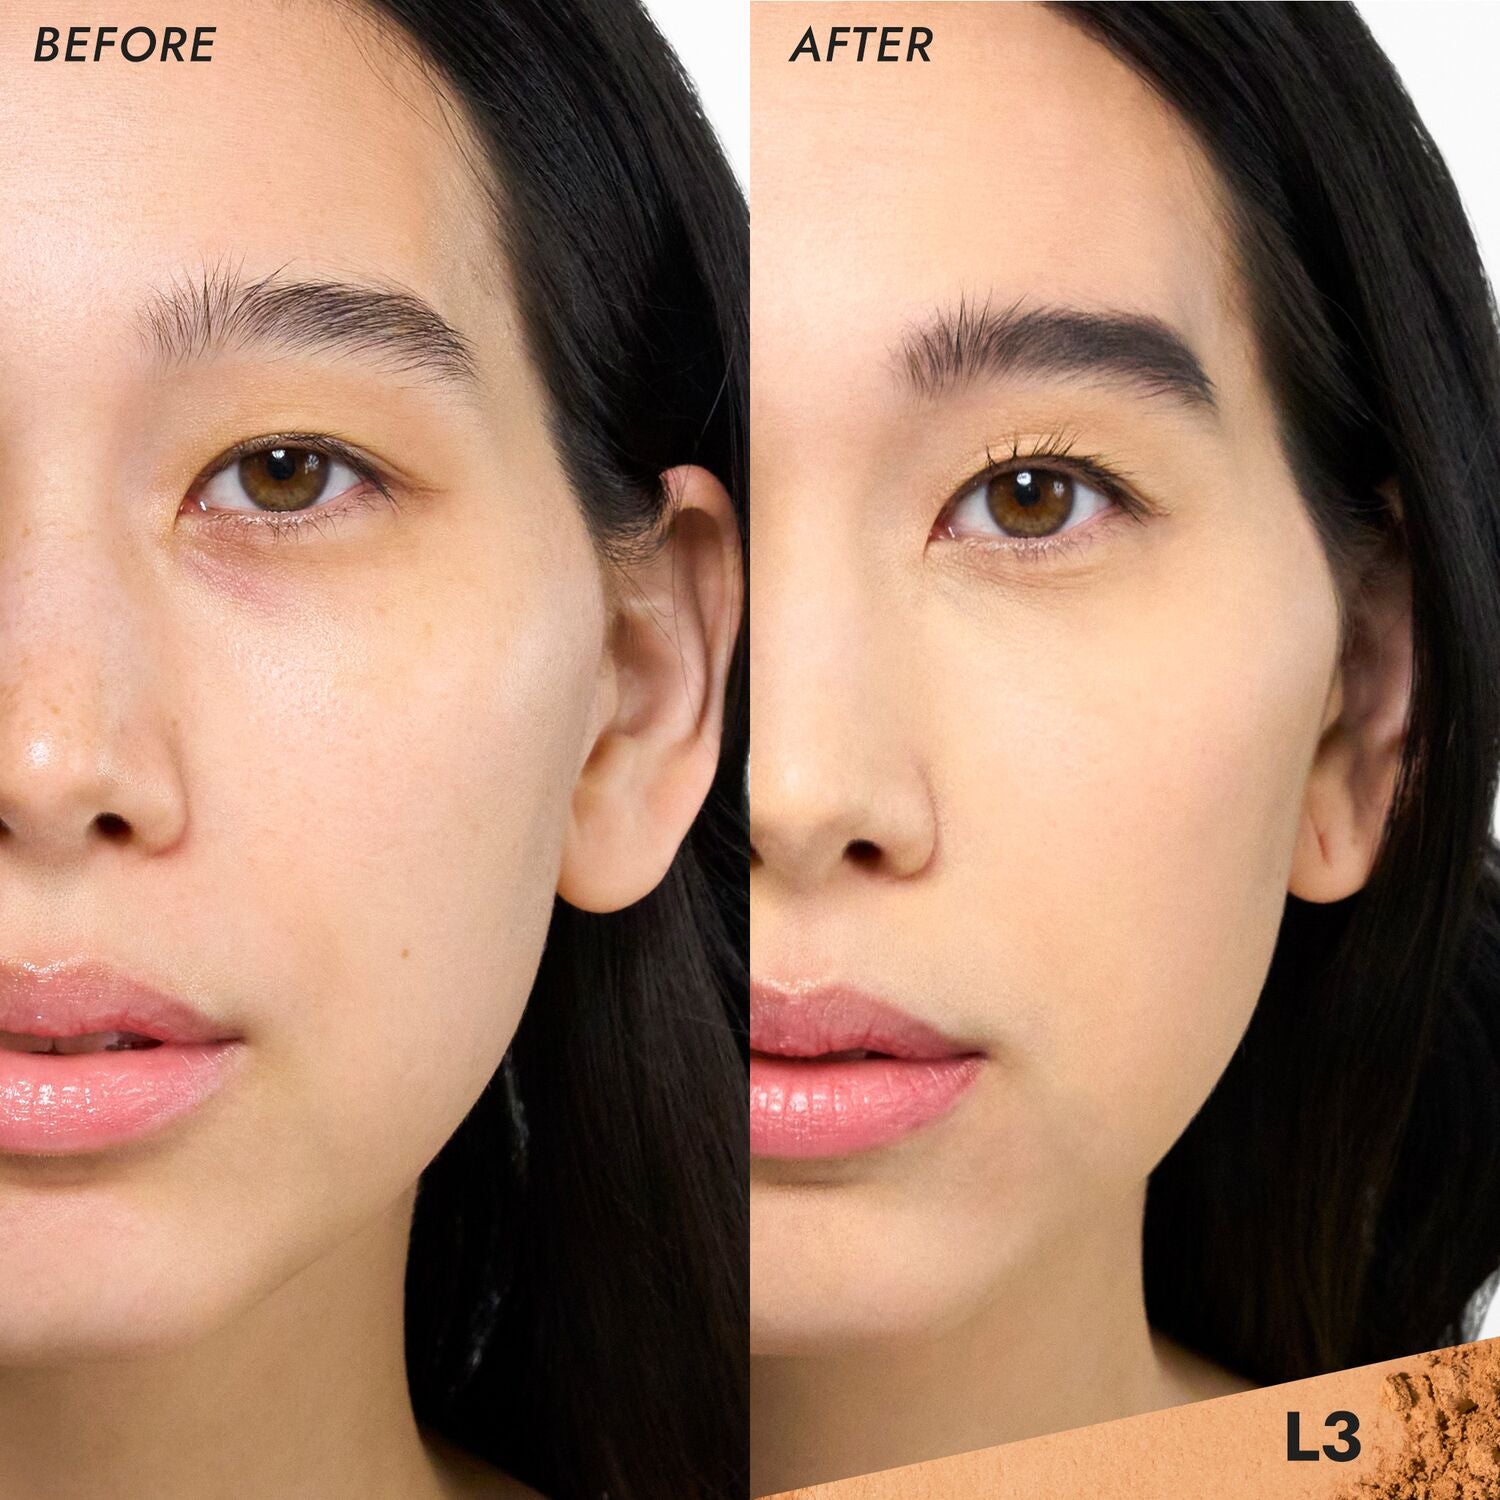 Coverfx Pressed Mineral Foundation model before and after image in shade  L3